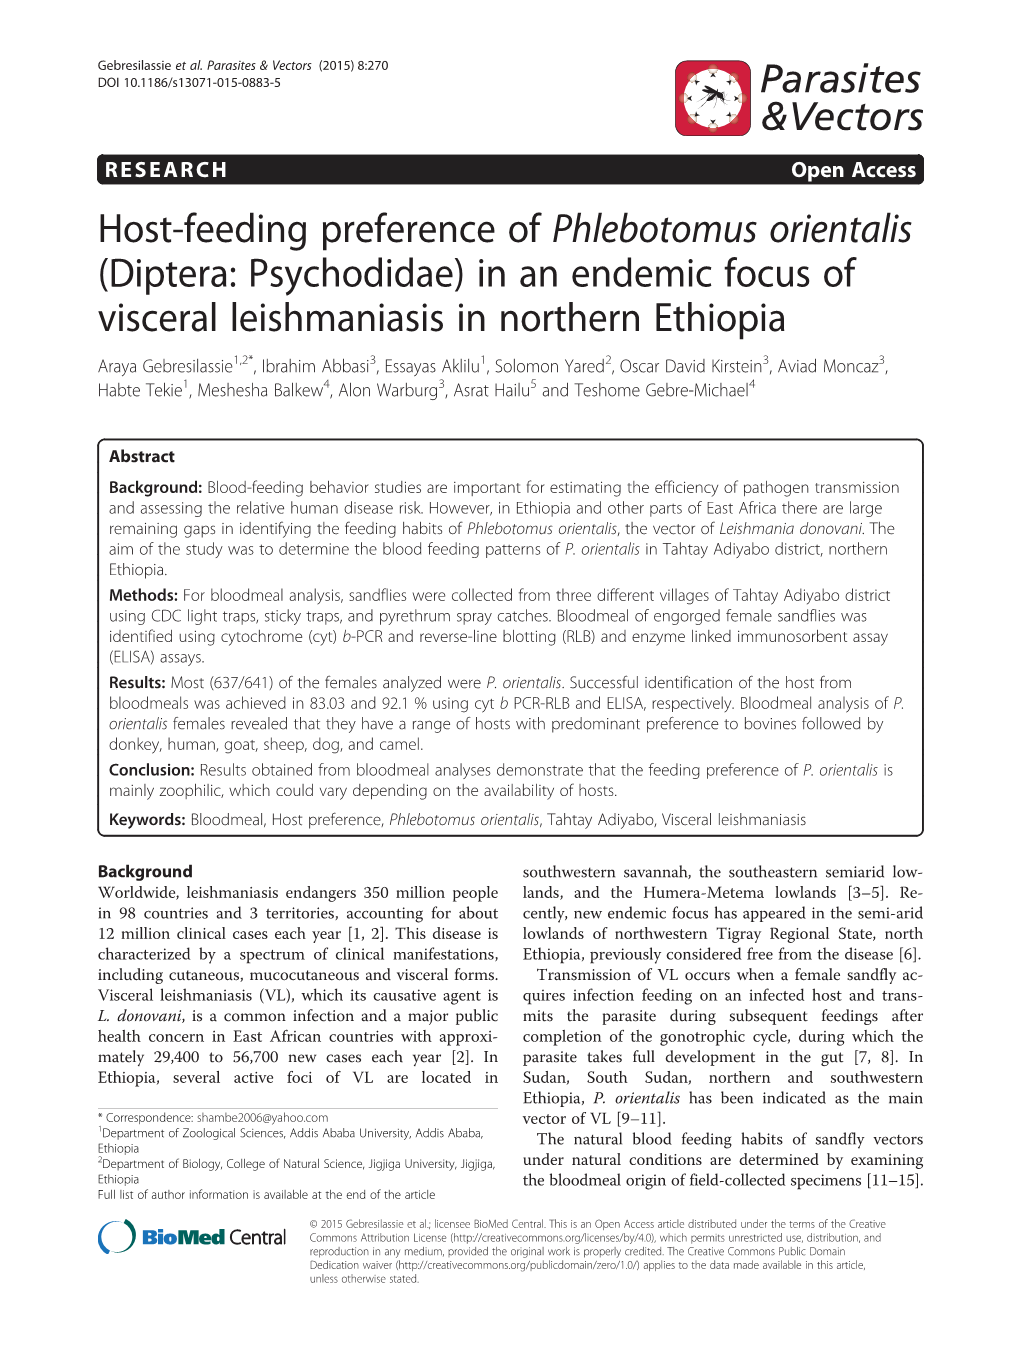 Host-Feeding Preference of Phlebotomus Orientalis (Diptera: Psychodidae) in an Endemic Focus of Visceral Leishmaniasis in Northe